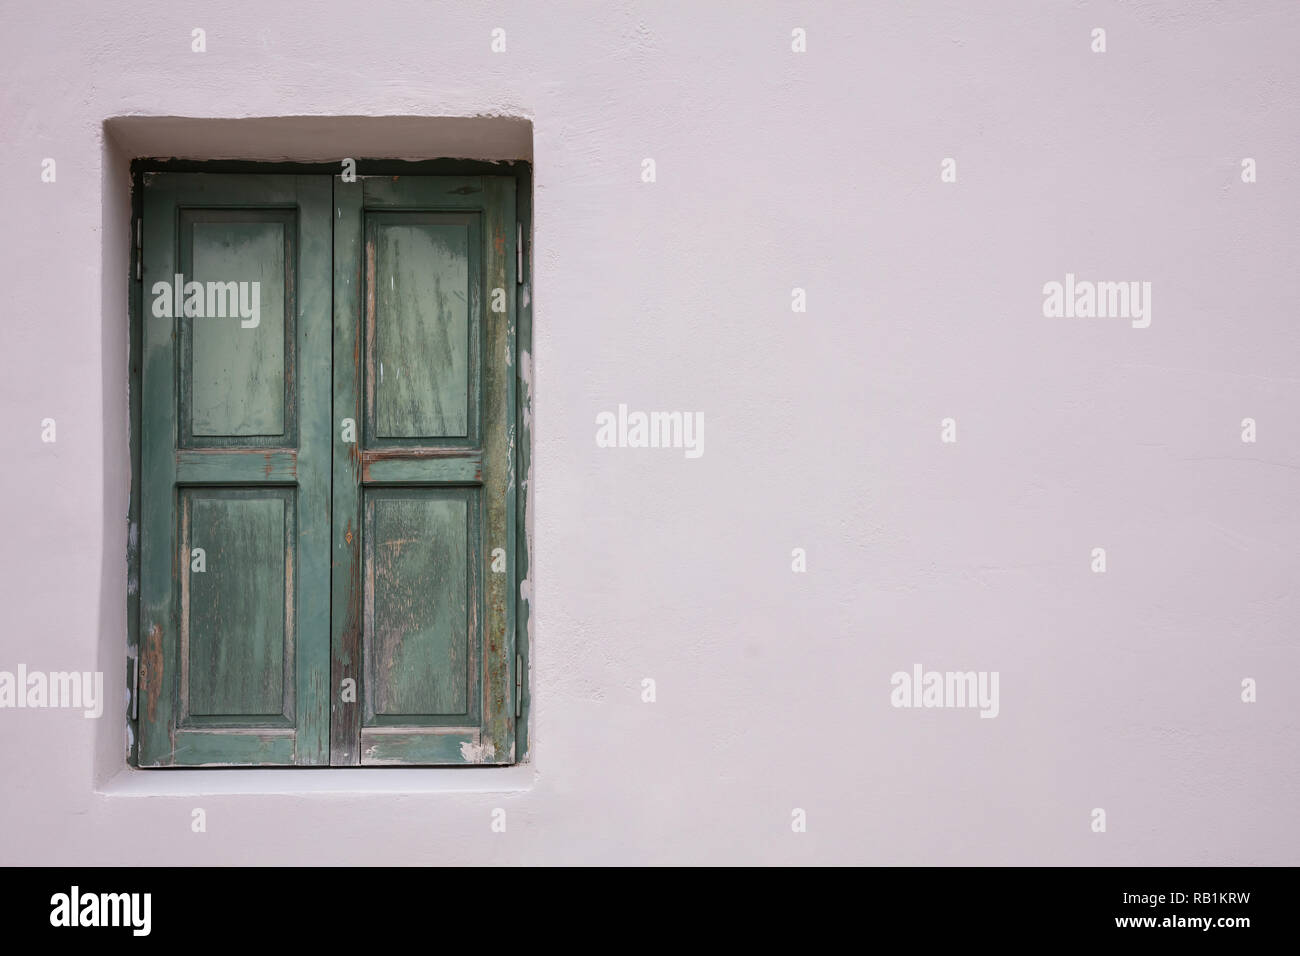 Old fashioned worn window with green wooden shutters, closed, on painted wall background. Traditional house facade, old town of Plaka, Athens Greece Stock Photo